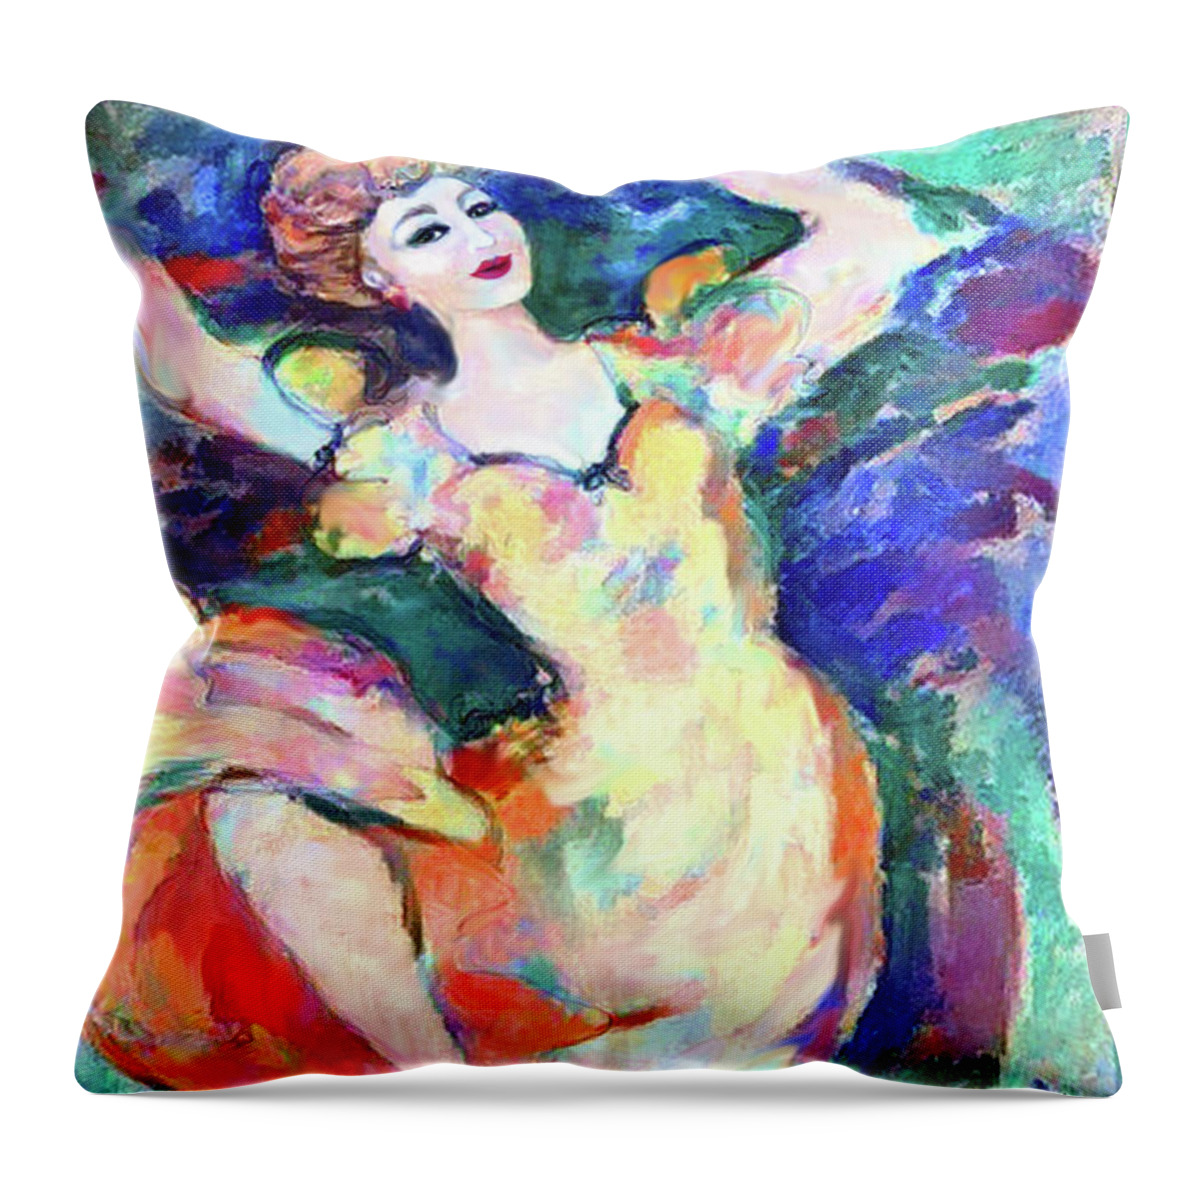 Figurative Art Throw Pillow featuring the digital art New Dancing Shoes 02 by Stacey Mayer